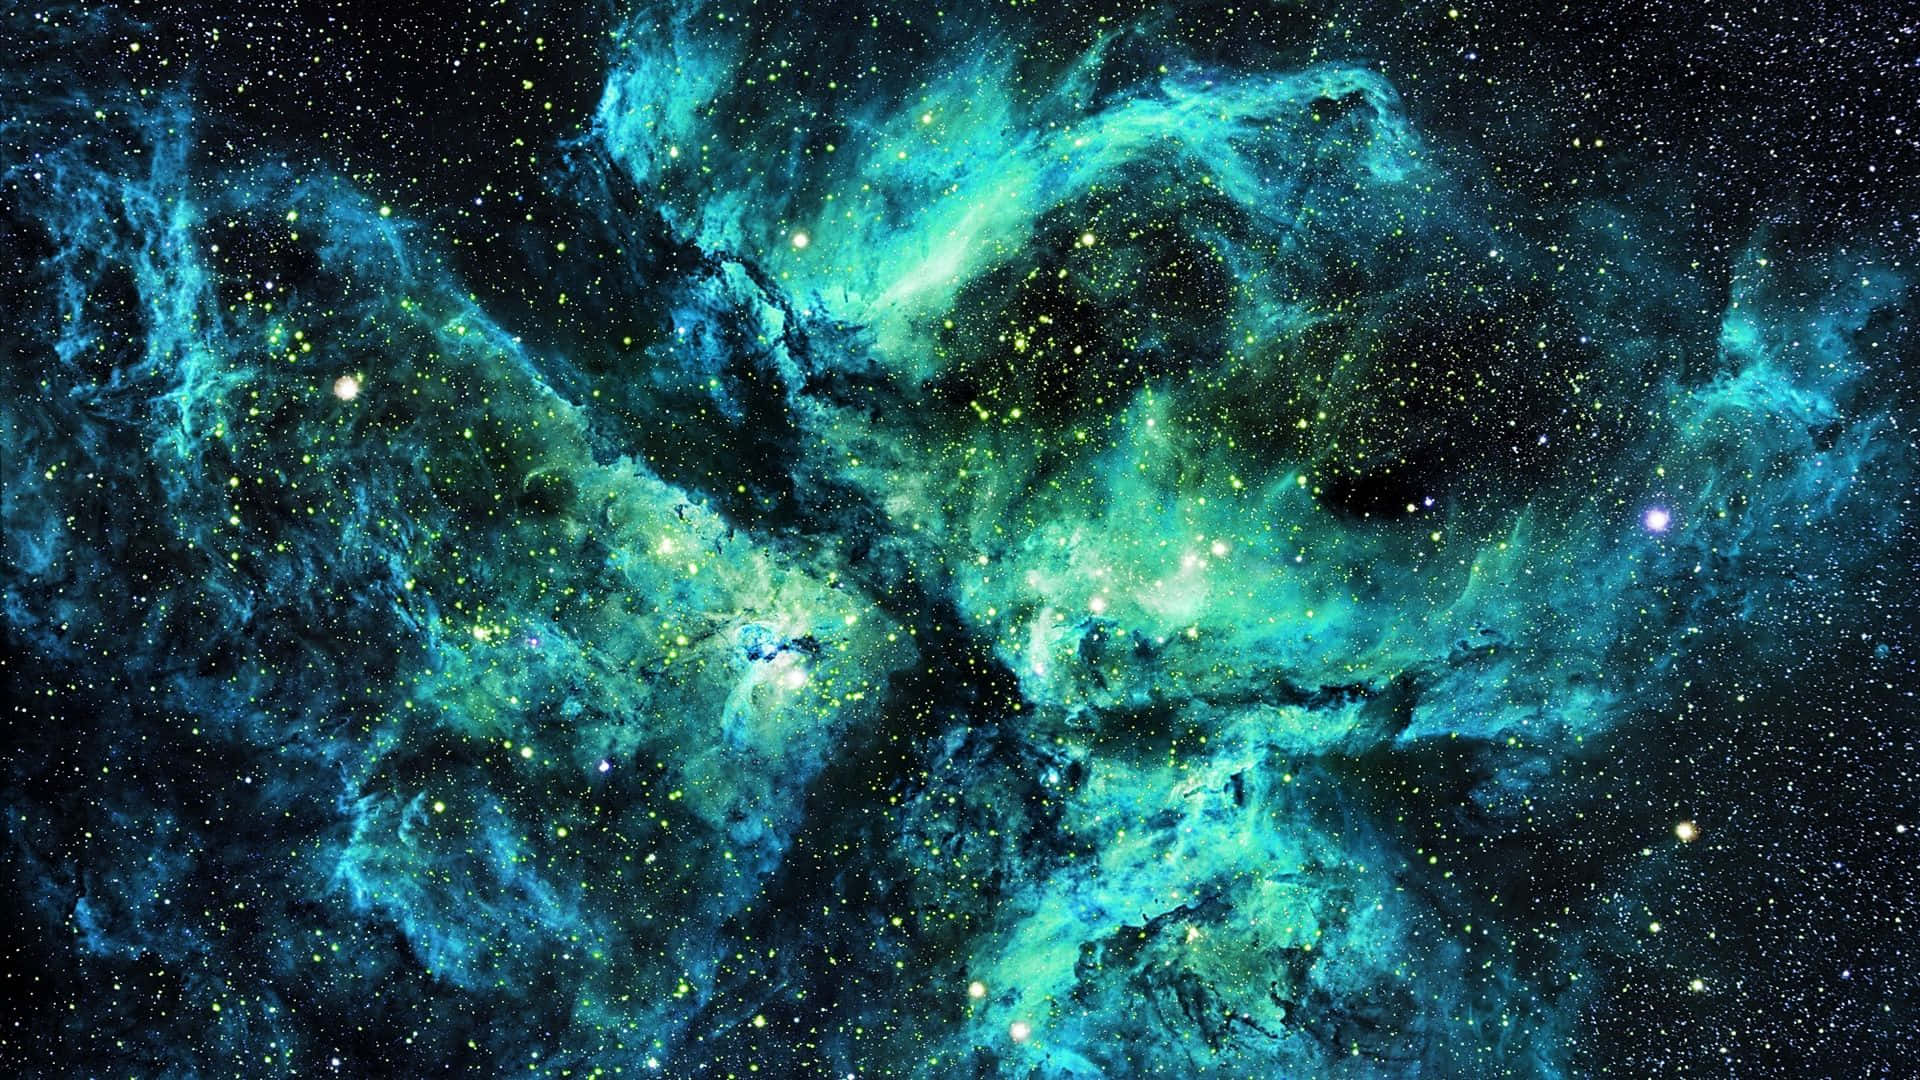 Explore the twisting clouds of the Space Nebula Wallpaper